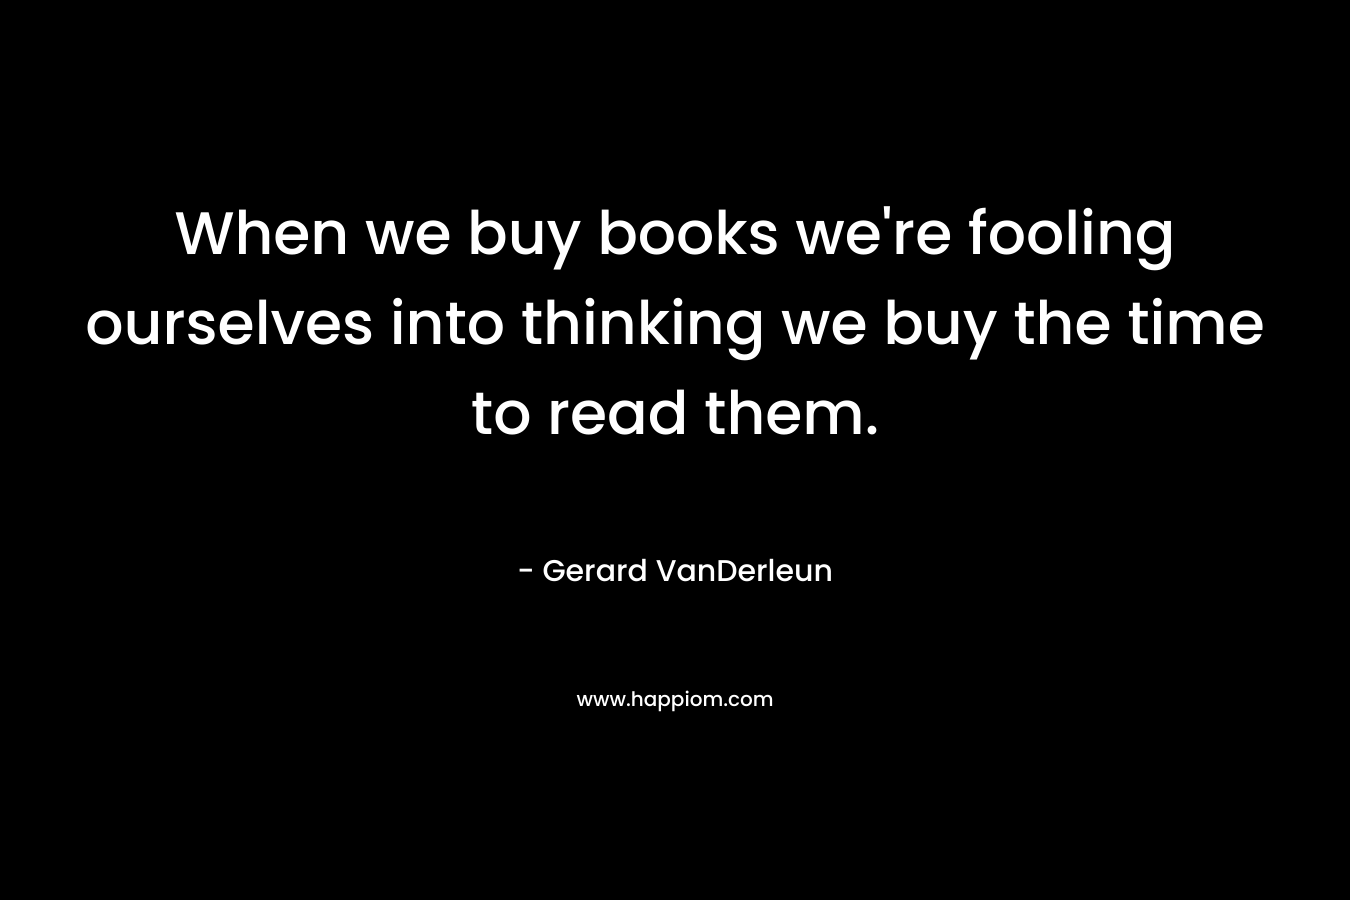 When we buy books we're fooling ourselves into thinking we buy the time to read them.